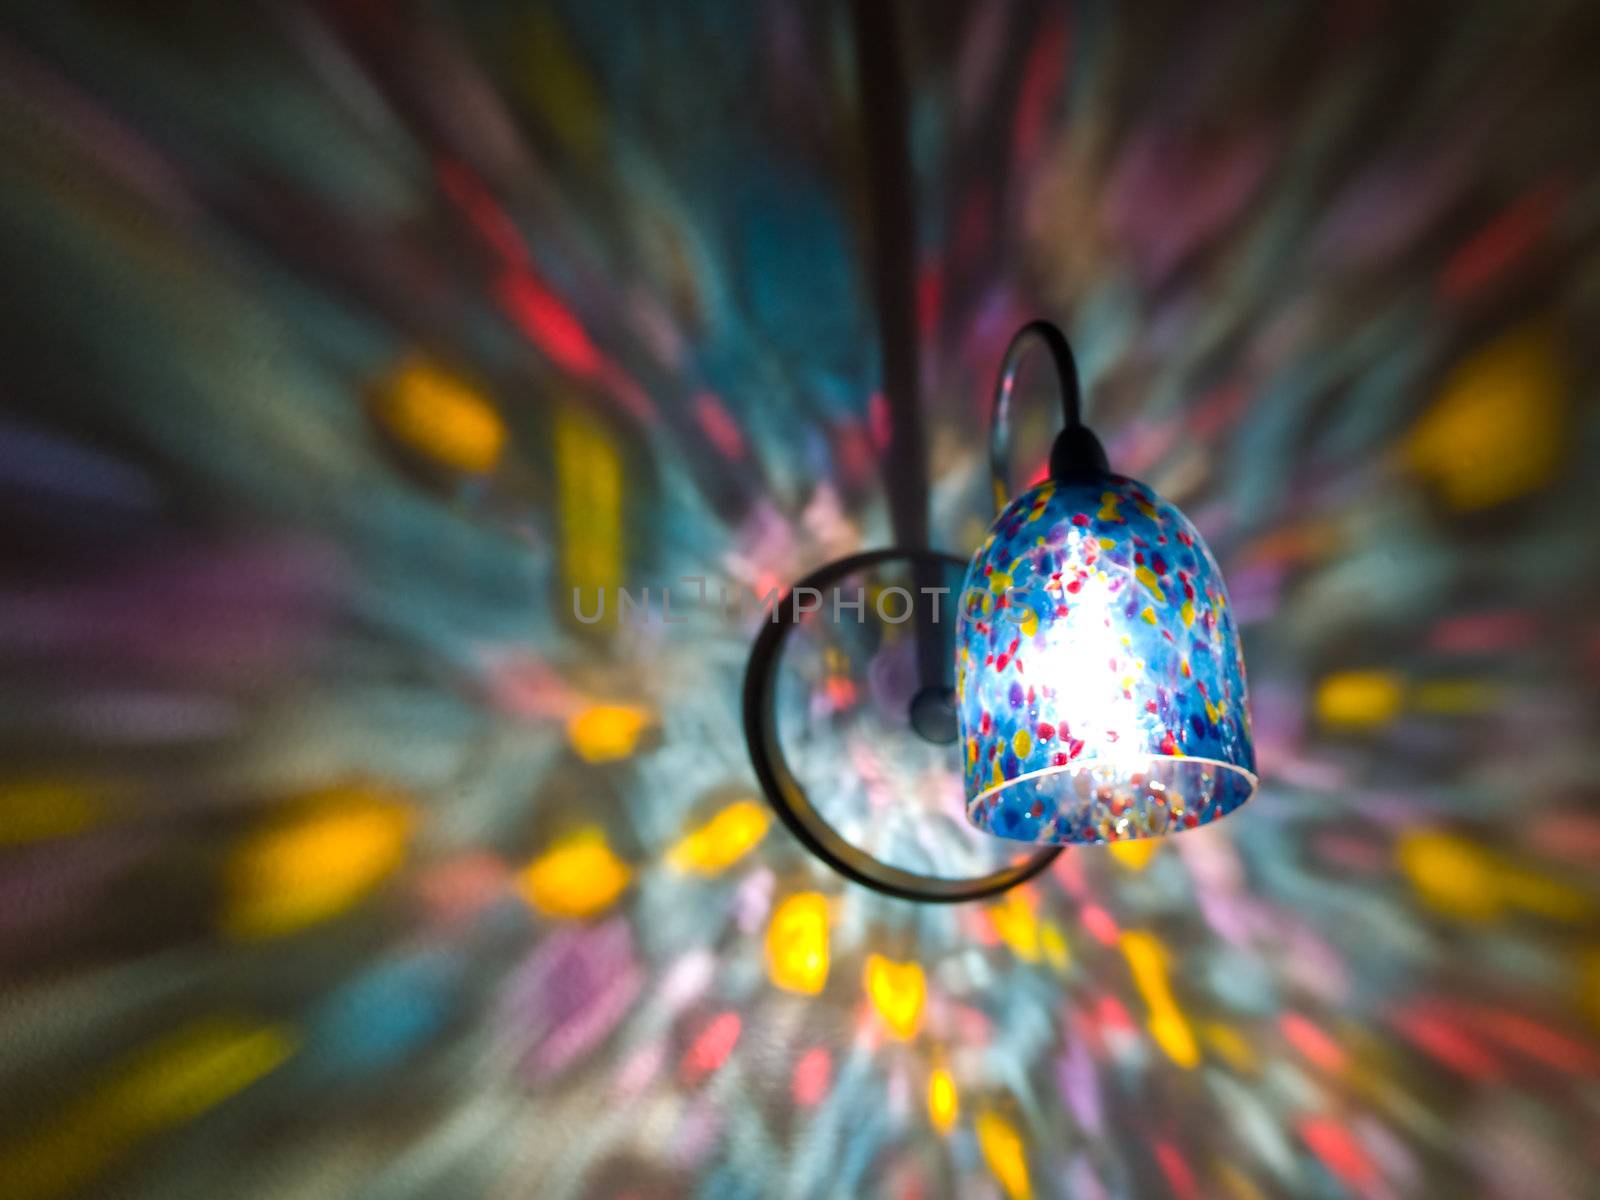 Lamp Lights in a Rainbow Sconce on a Wall